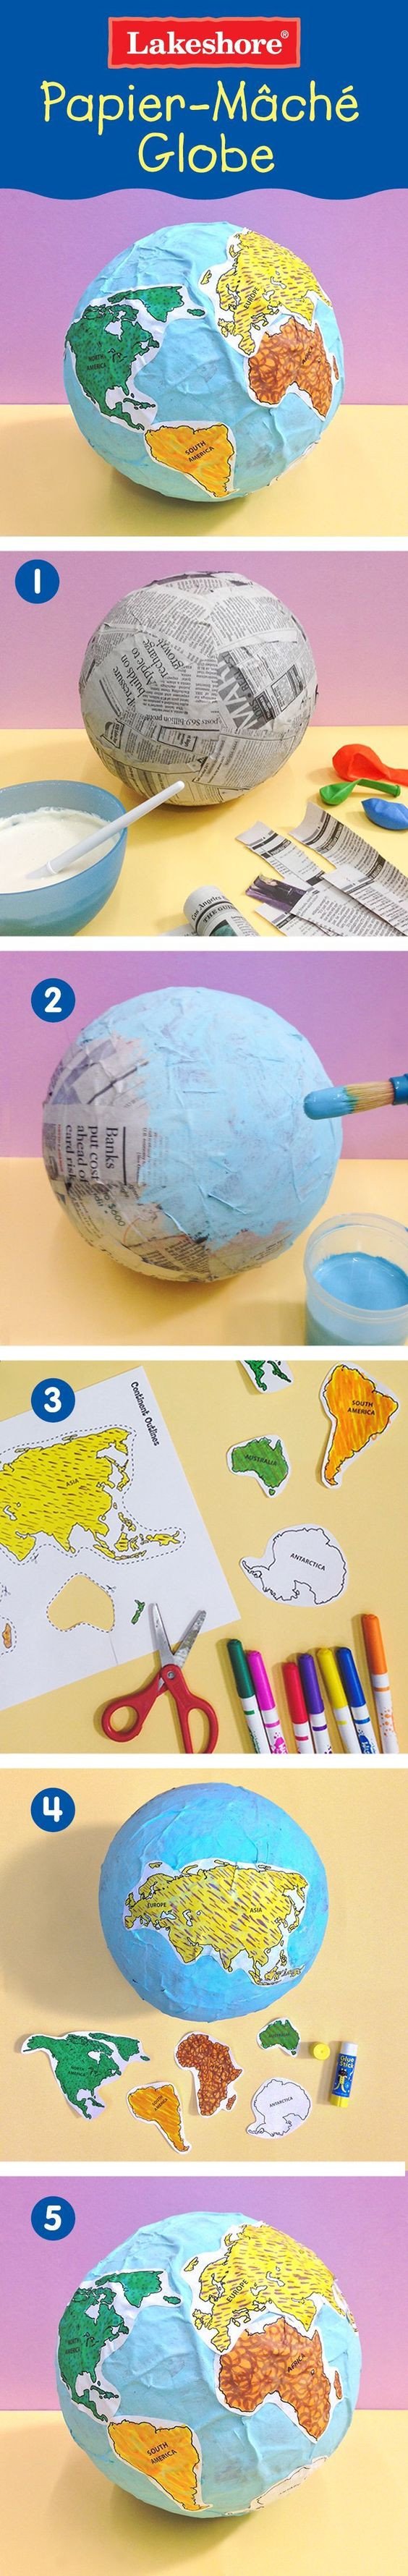 Paper mache Continents and Globes on Pinterest